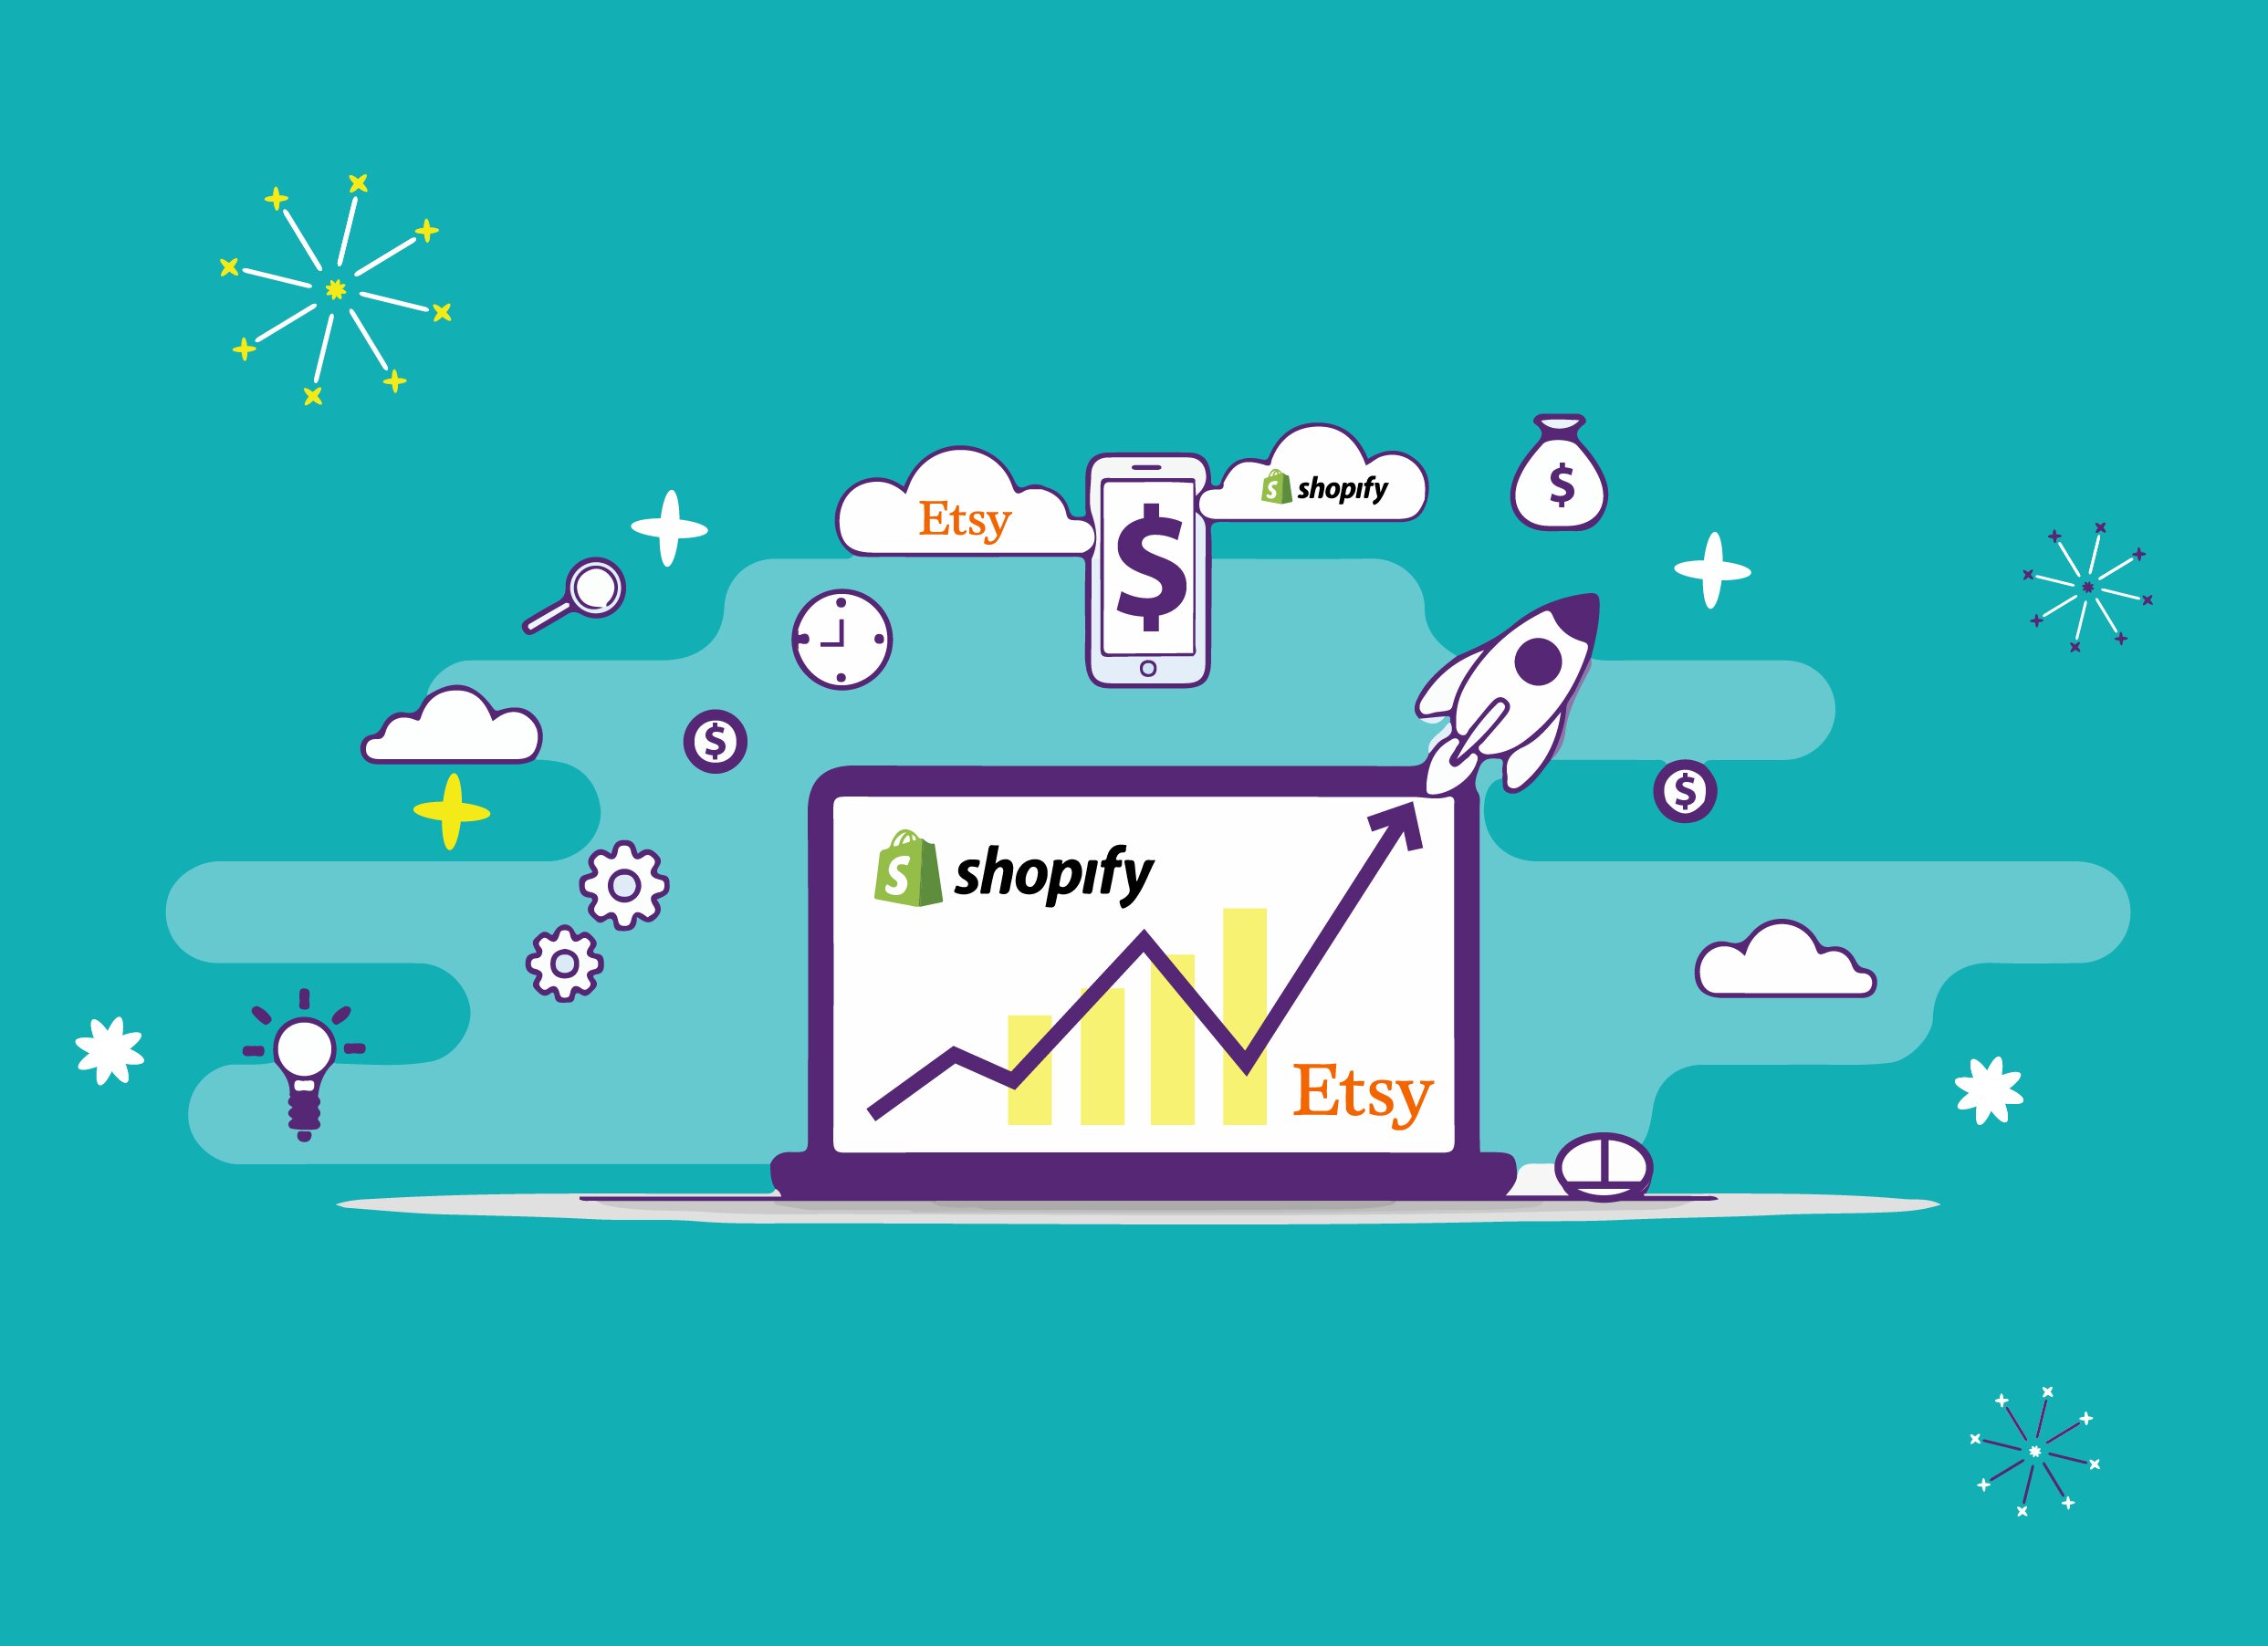 Combining Shopify and Esty